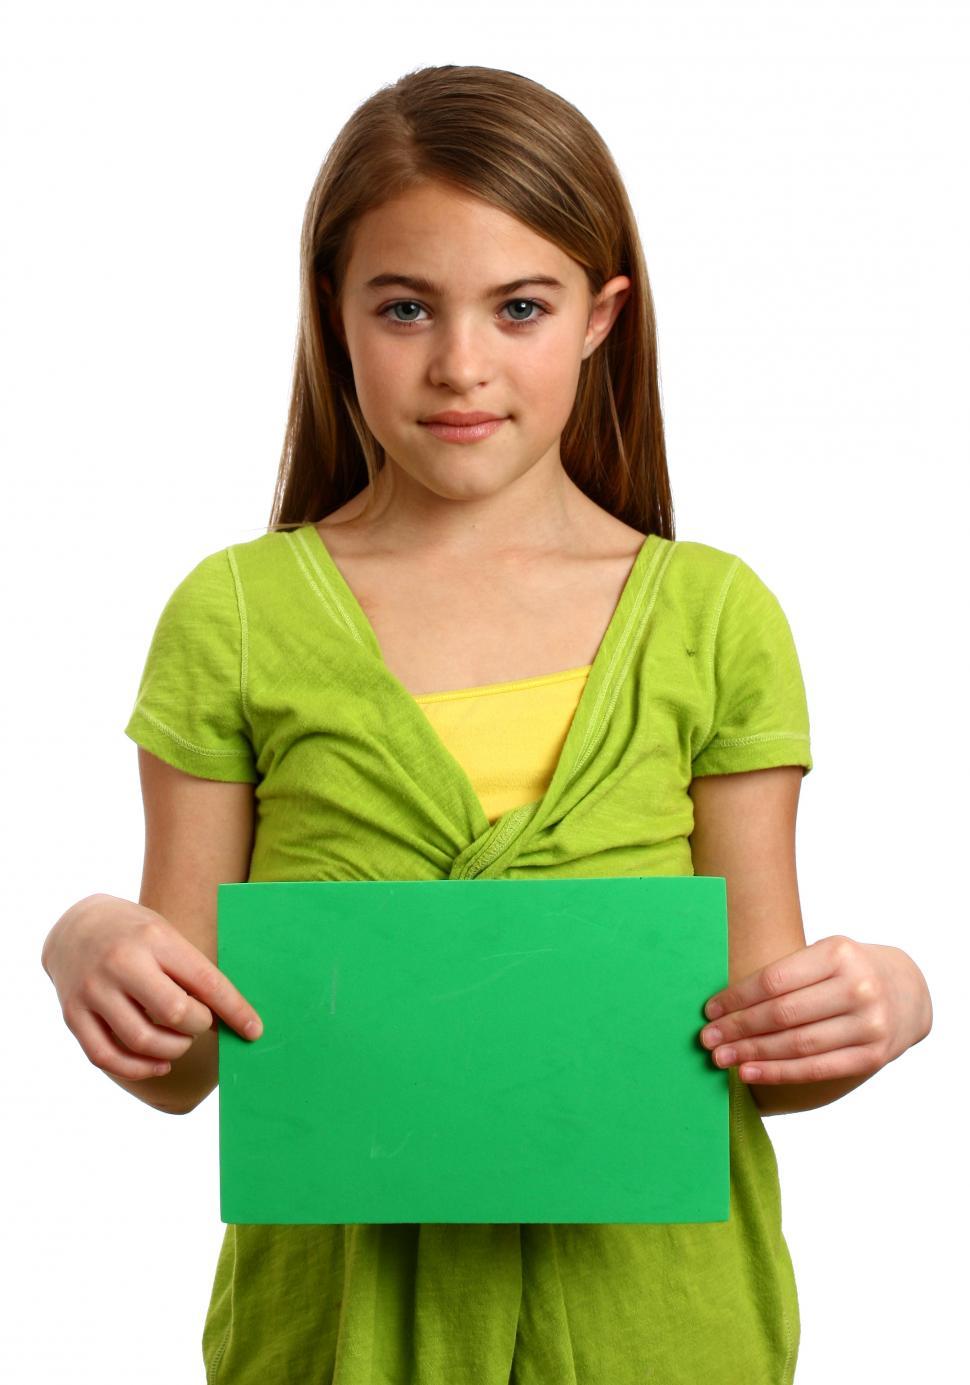 Free Image of A beautiful young girl holding a blank green sign 